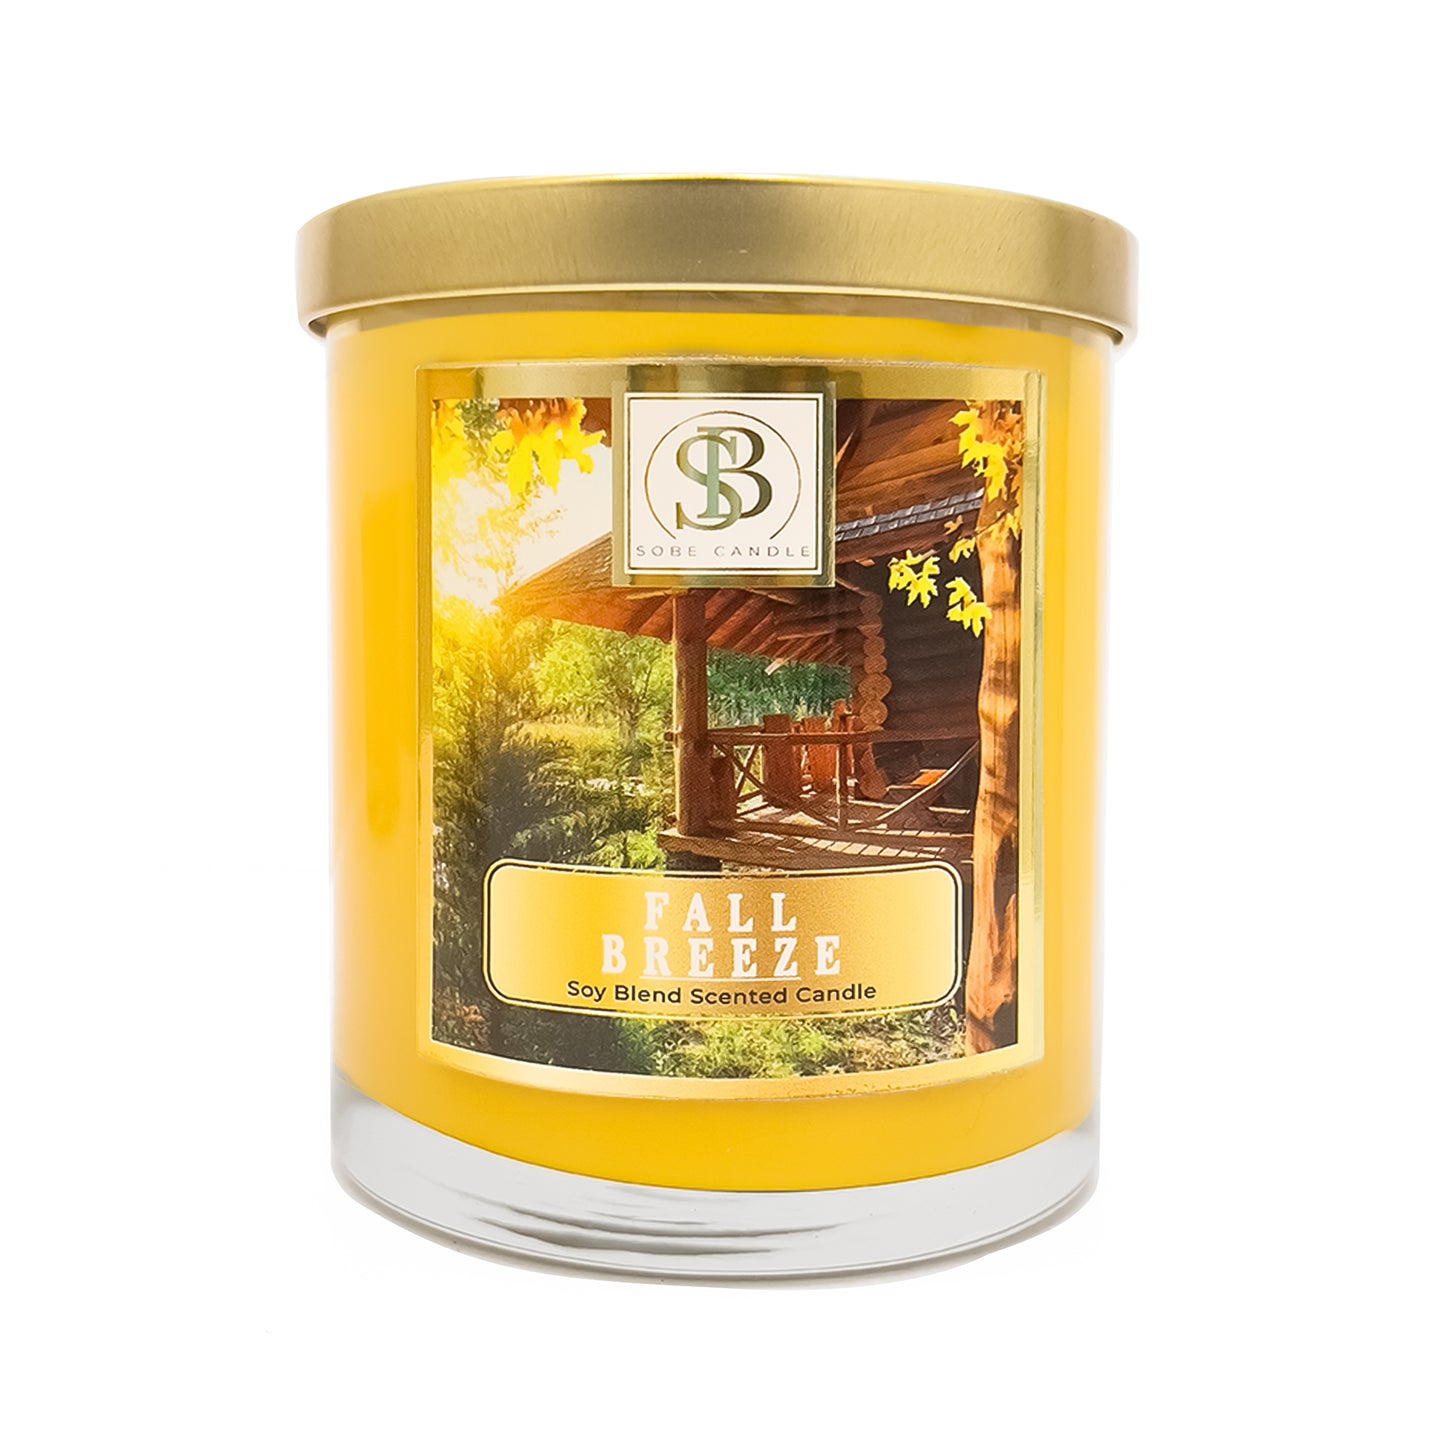 FALL BREEZE | Soy Scented Candle 11 oz